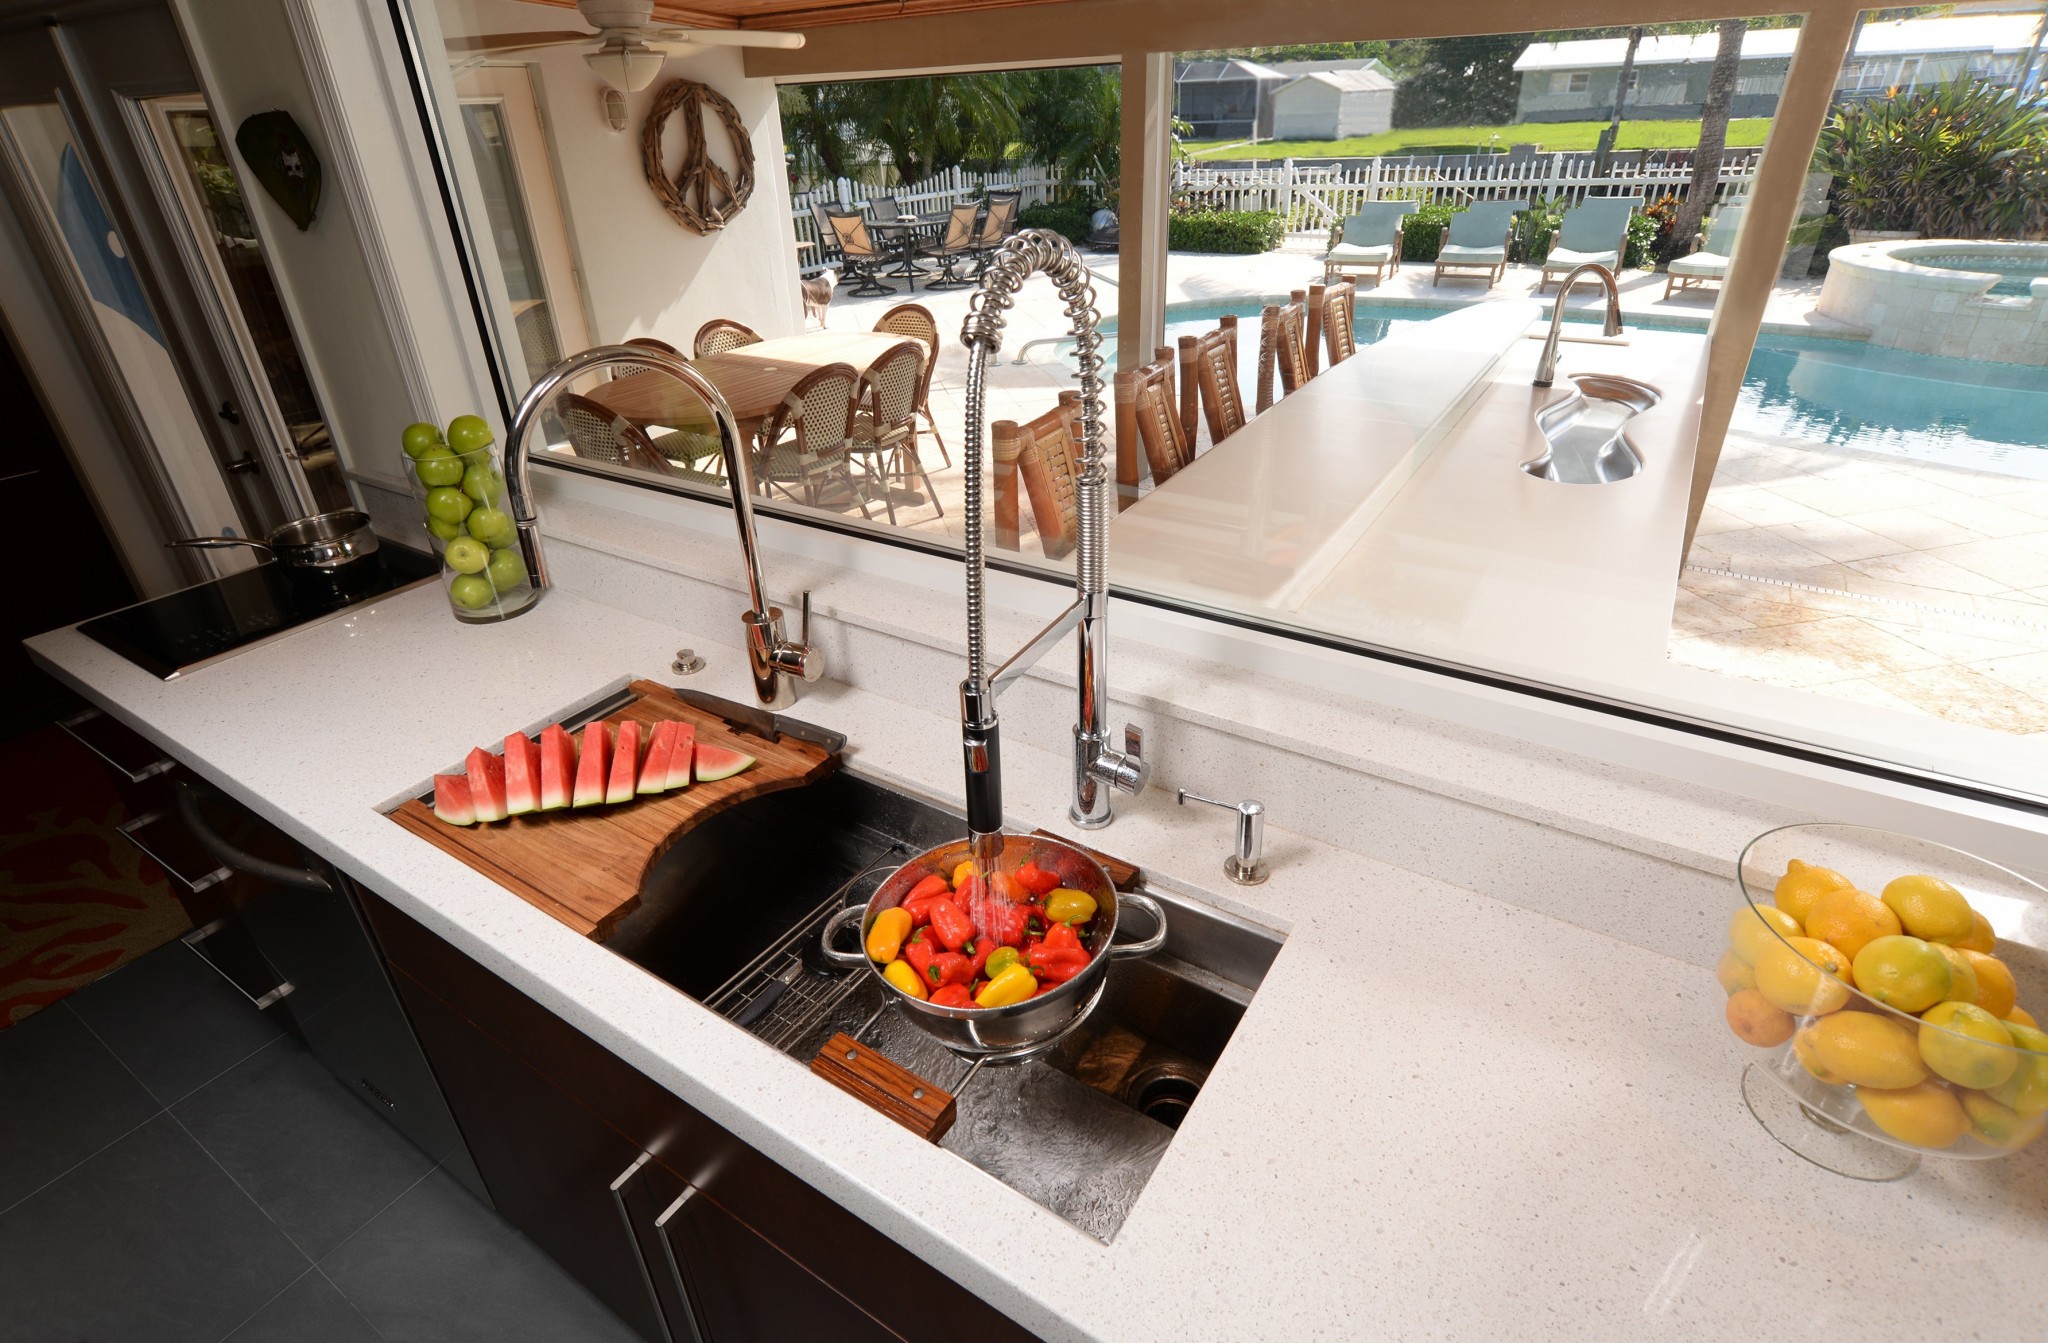 A chef sink with a two burner induction cooktop makes the perfect cleanup prep area.